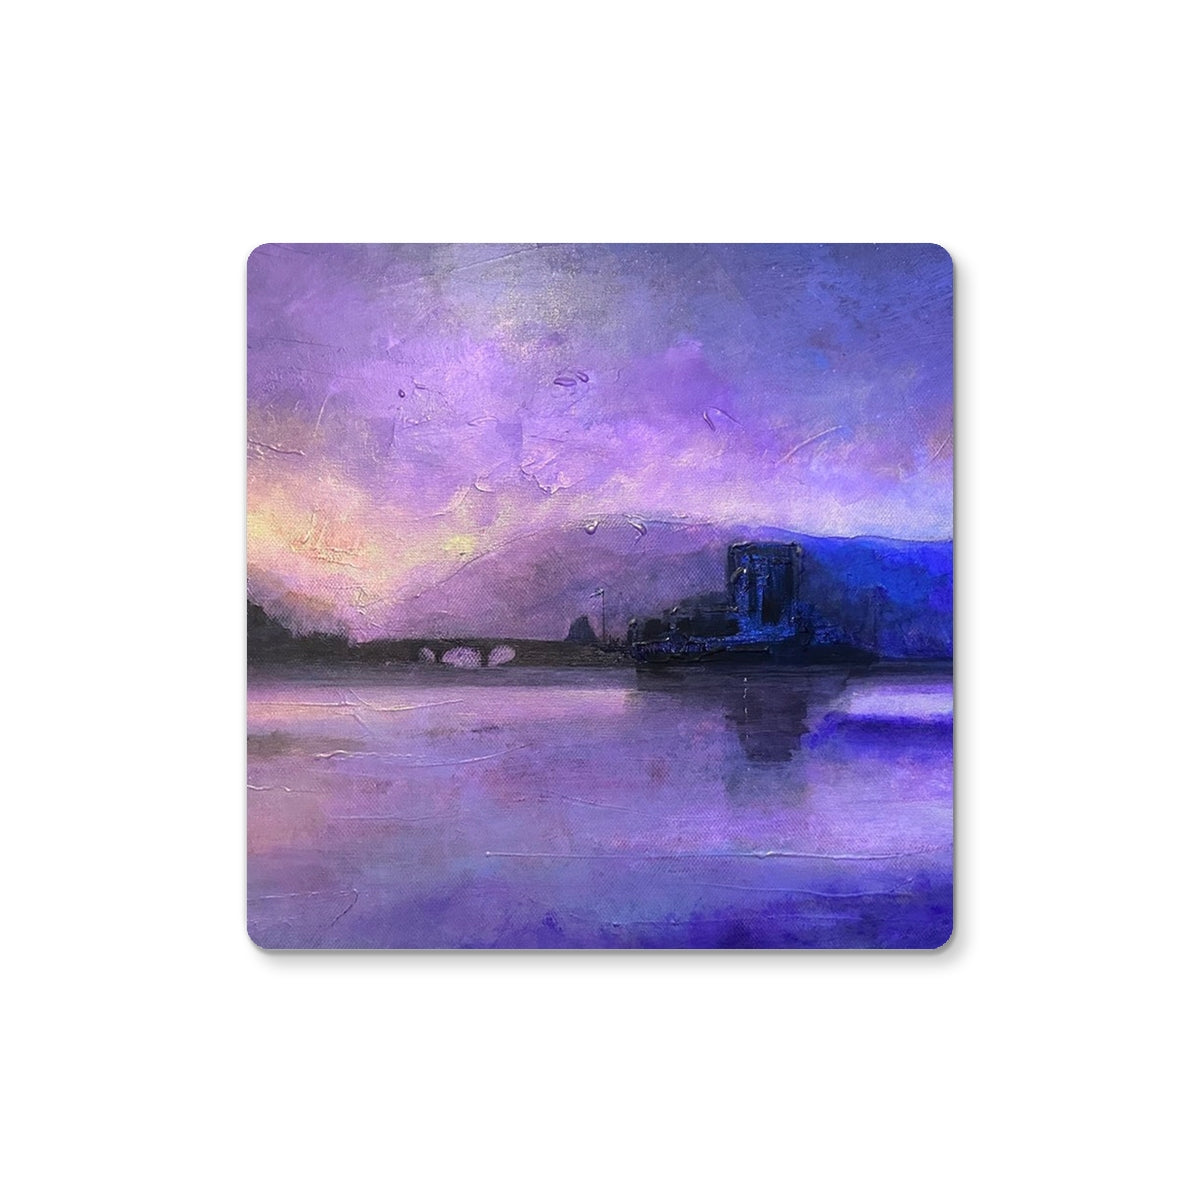 Eilean Donan Castle Moonset Art Gifts Coaster-Coasters-Historic & Iconic Scotland Art Gallery-2 Coasters-Paintings, Prints, Homeware, Art Gifts From Scotland By Scottish Artist Kevin Hunter